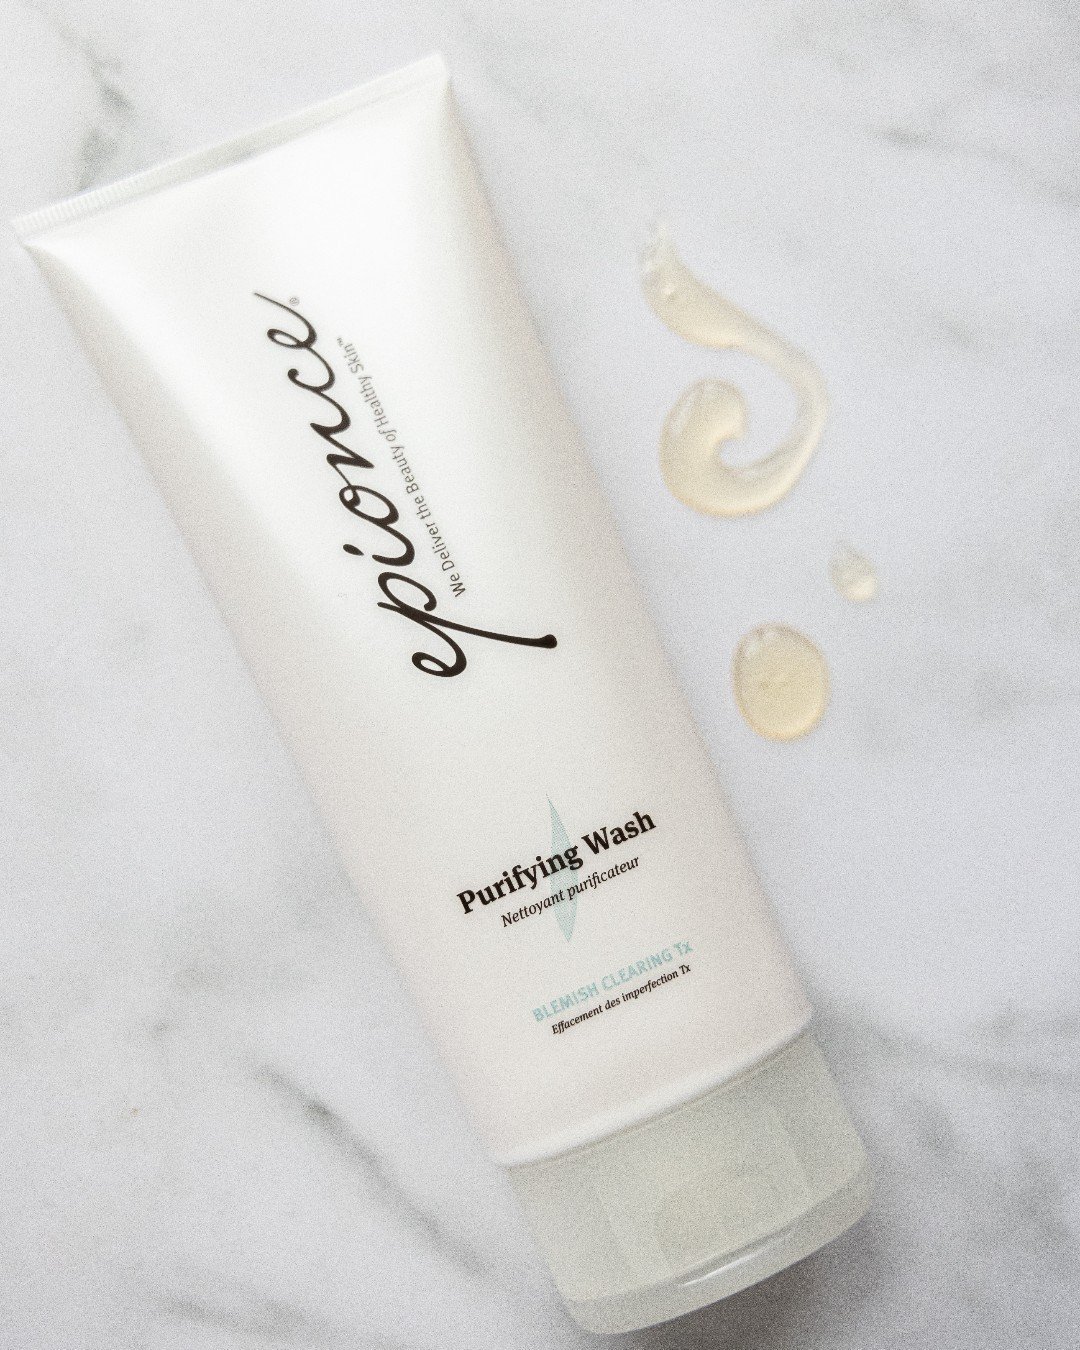 Shower yourself with superior skin care thx to @epionce purifying wash!

Clear blemishes + reduce imperfections for a refreshing cleanse from head to toe.